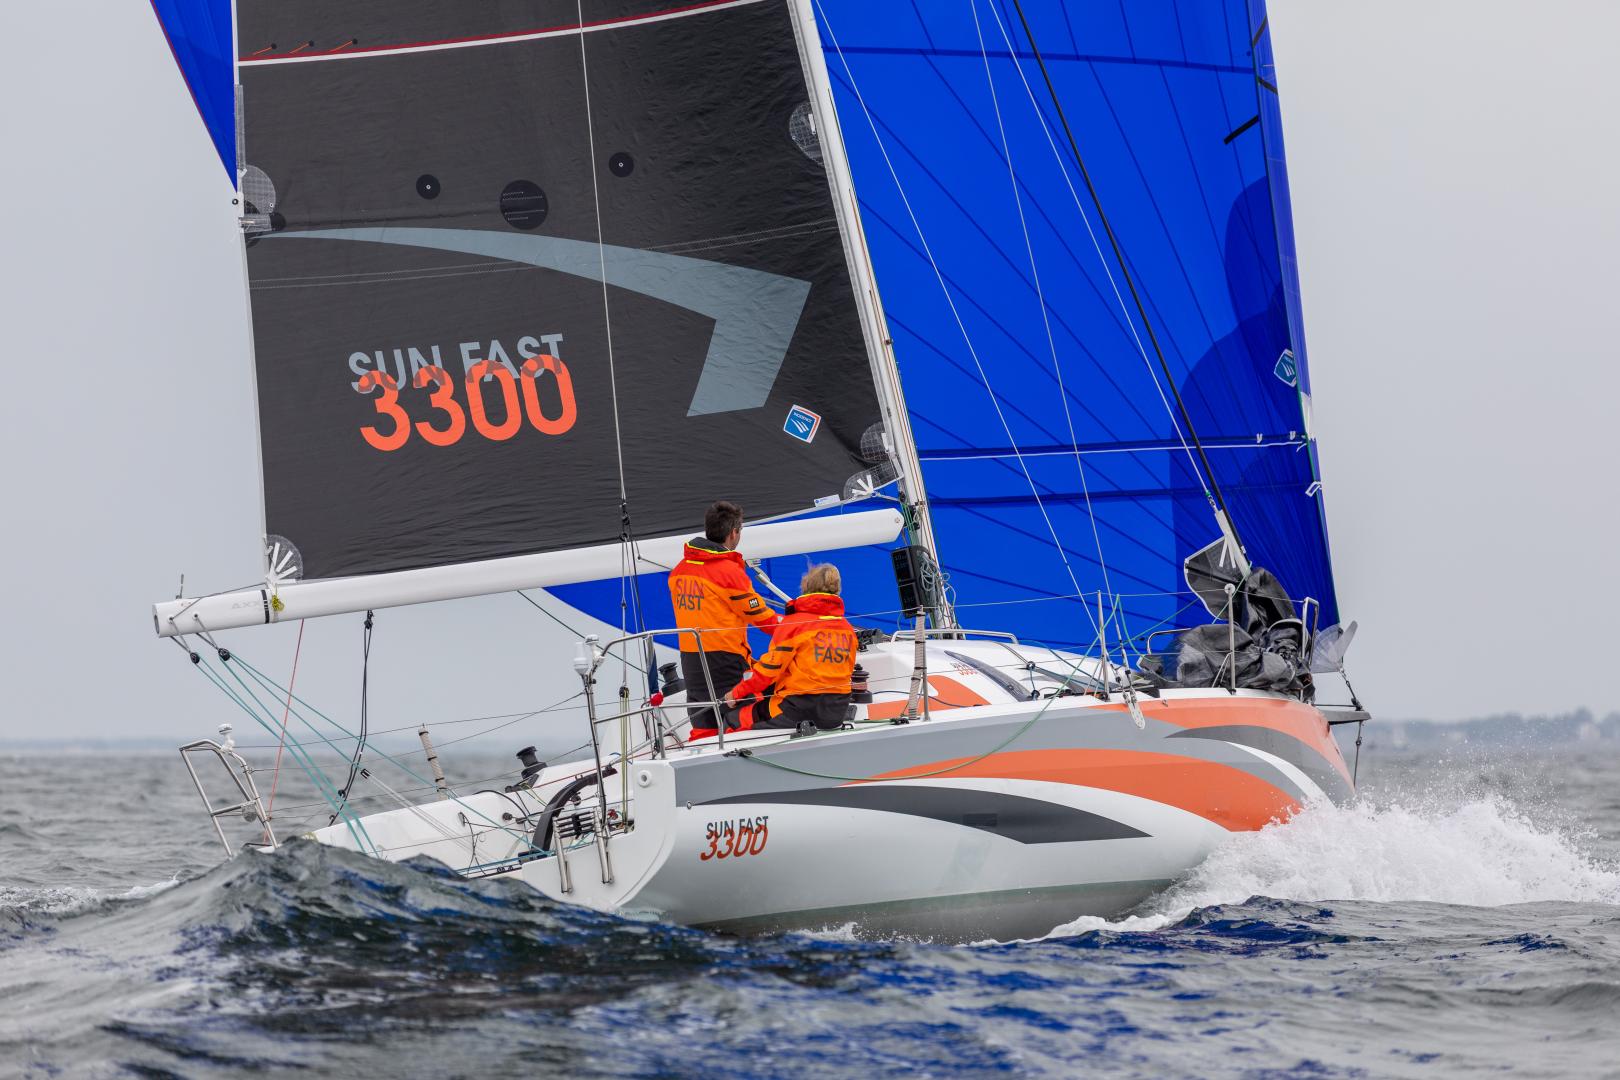 The Sun Fast 3300 is a remarkably successful design by any standards. More than 70 are already racing and around 15 of them are expected to be on the start line of this summerʼs Fastnet Race.